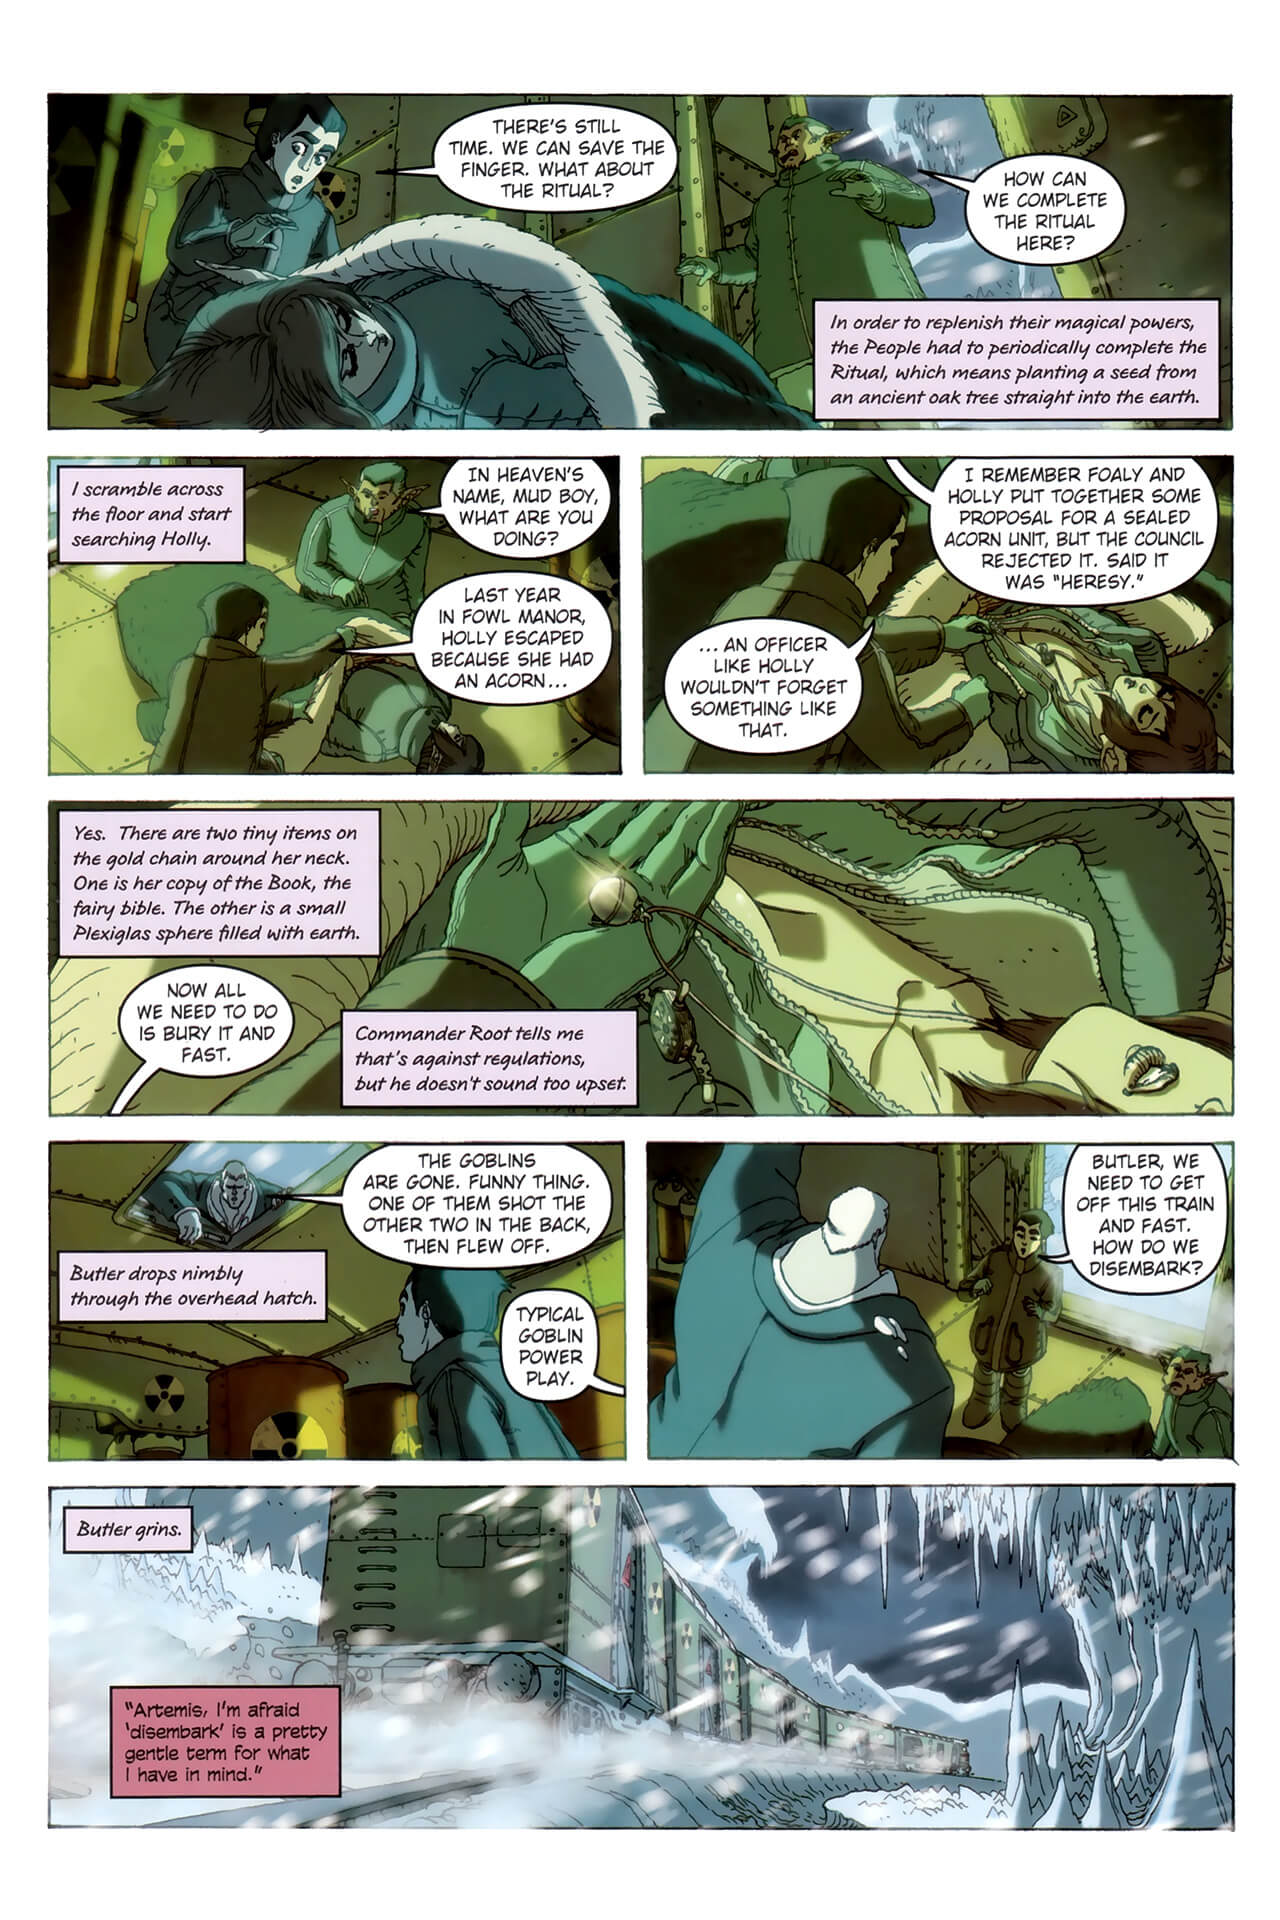 page 68 of artemis fowl the arctic incident graphic novel